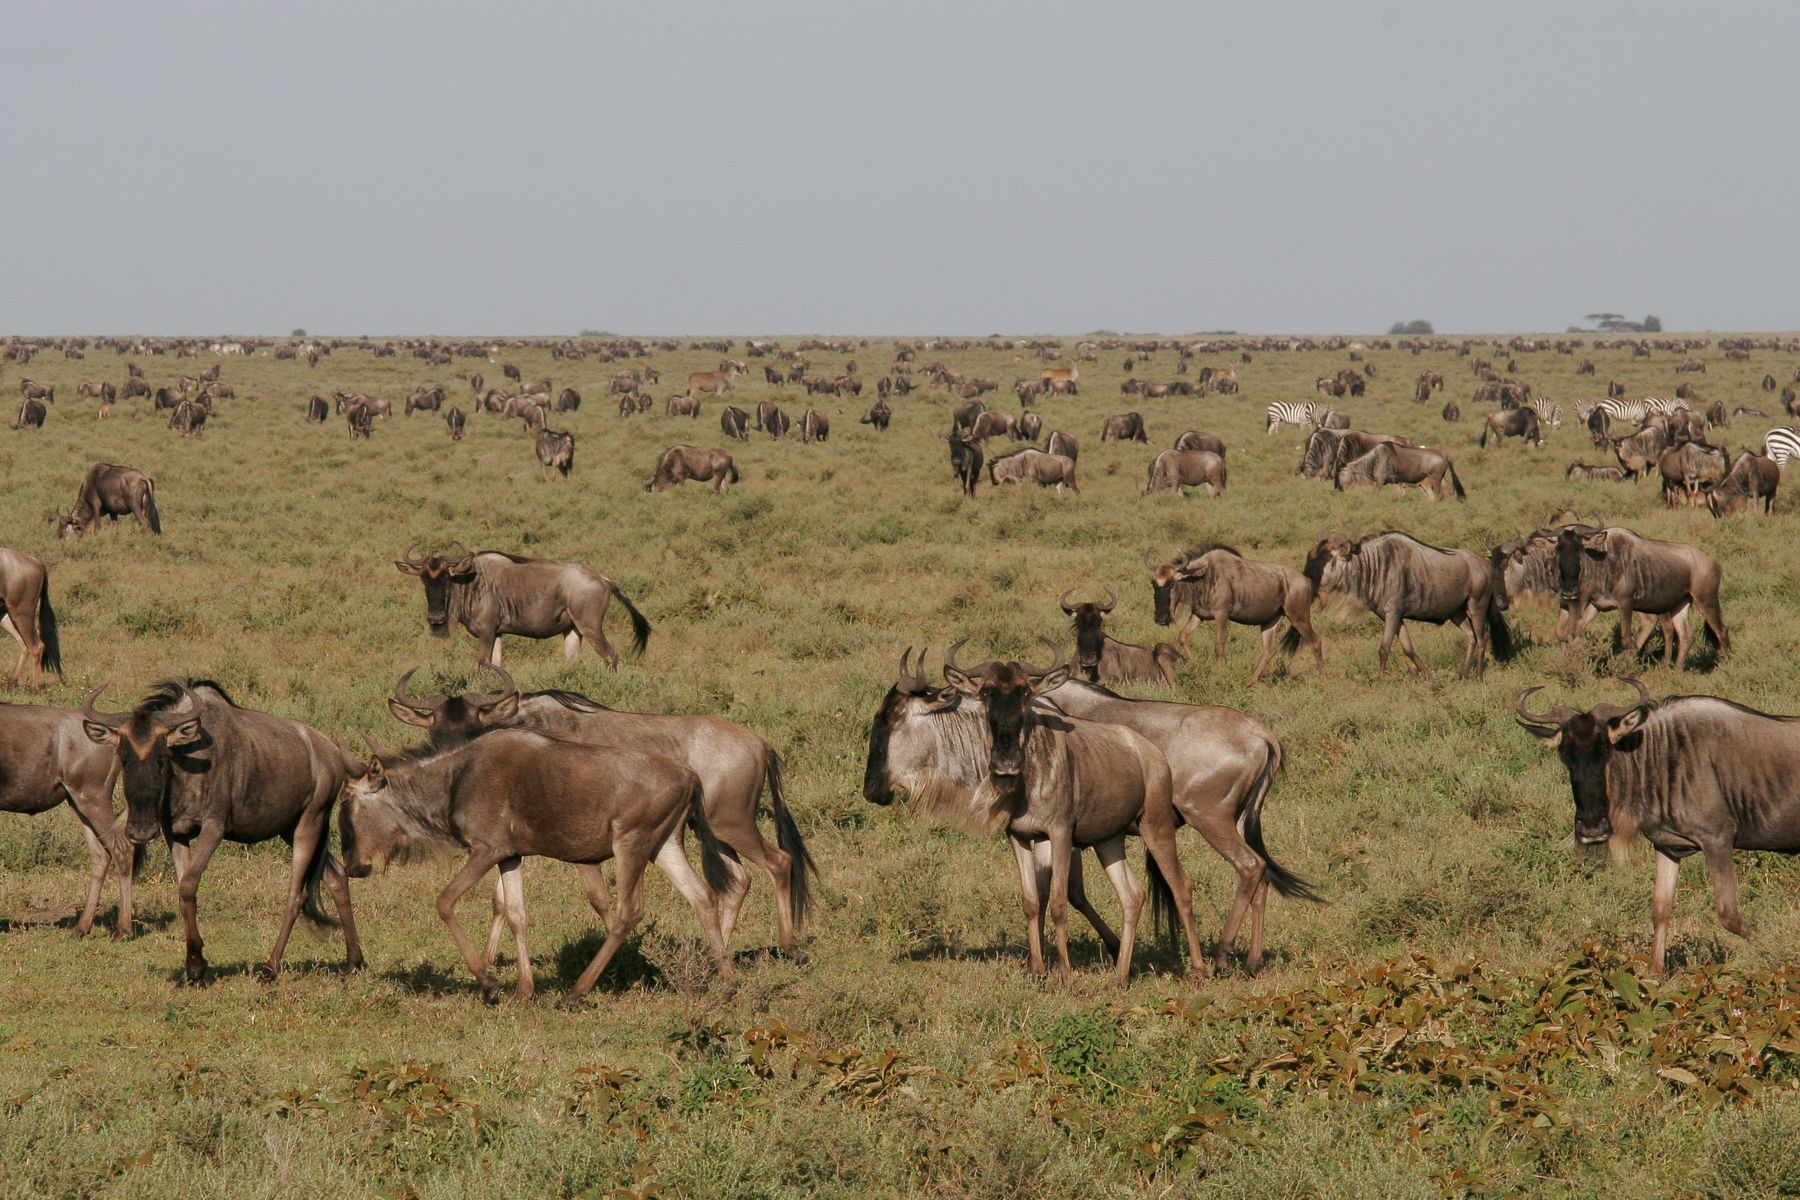 Within days the grass is growing and thousands, or tens of thousands of herbivores arrive, mostly Blue Wildebeest and Burchell's Zebras